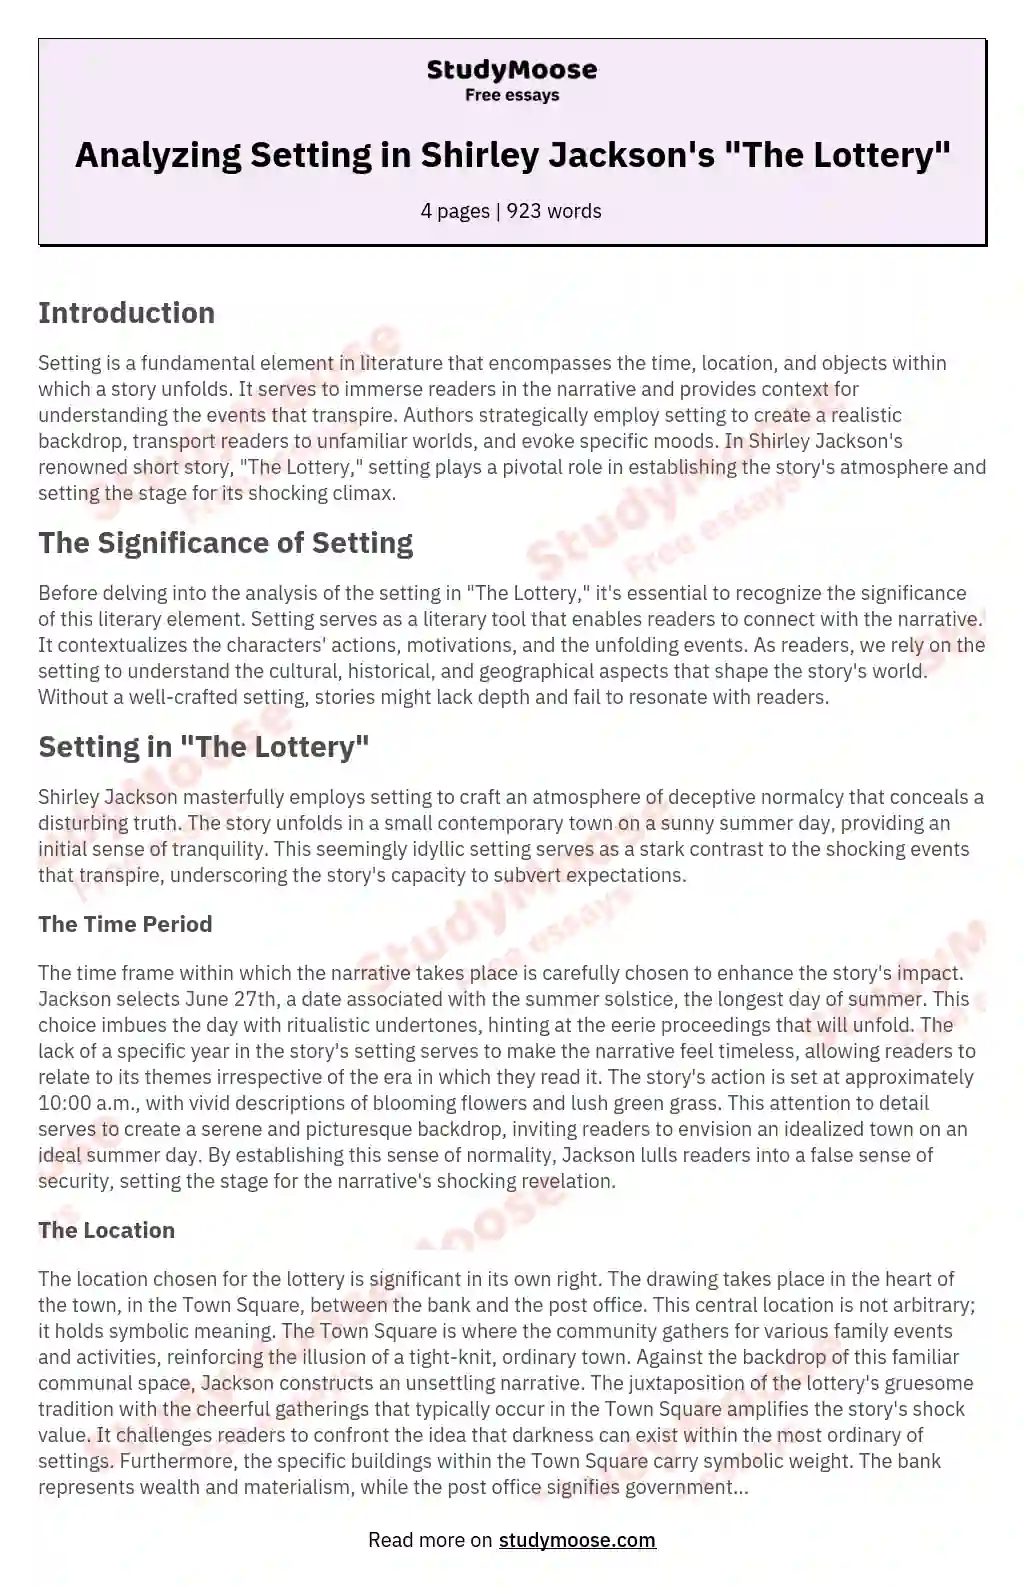 Analyzing Setting in Shirley Jackson's "The Lottery" essay